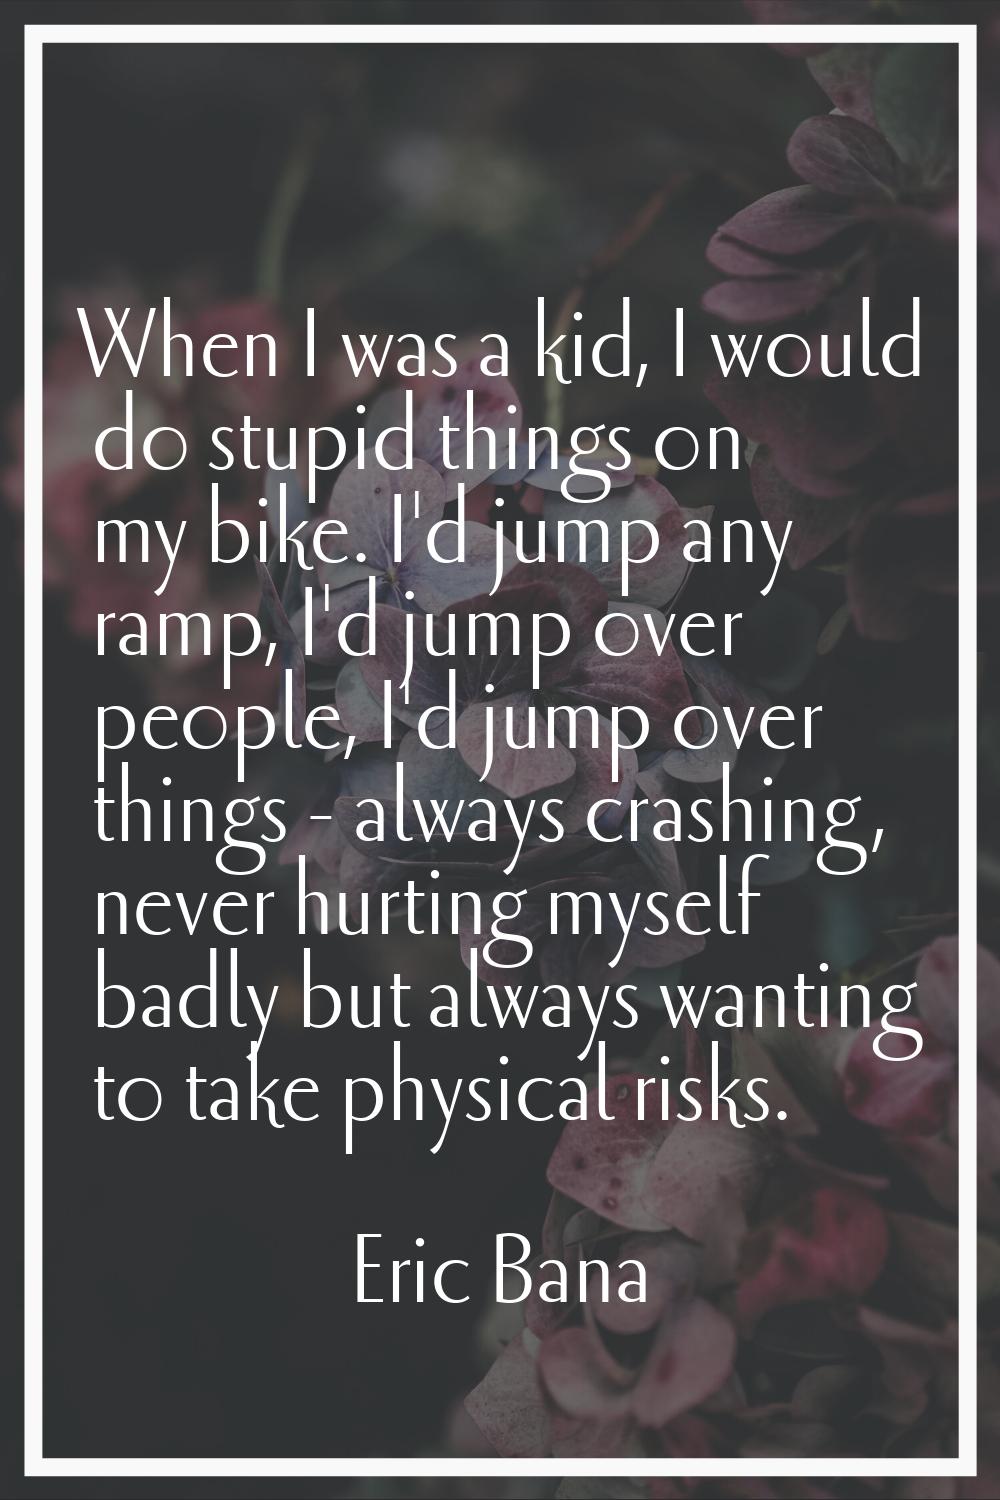 When I was a kid, I would do stupid things on my bike. I'd jump any ramp, I'd jump over people, I'd